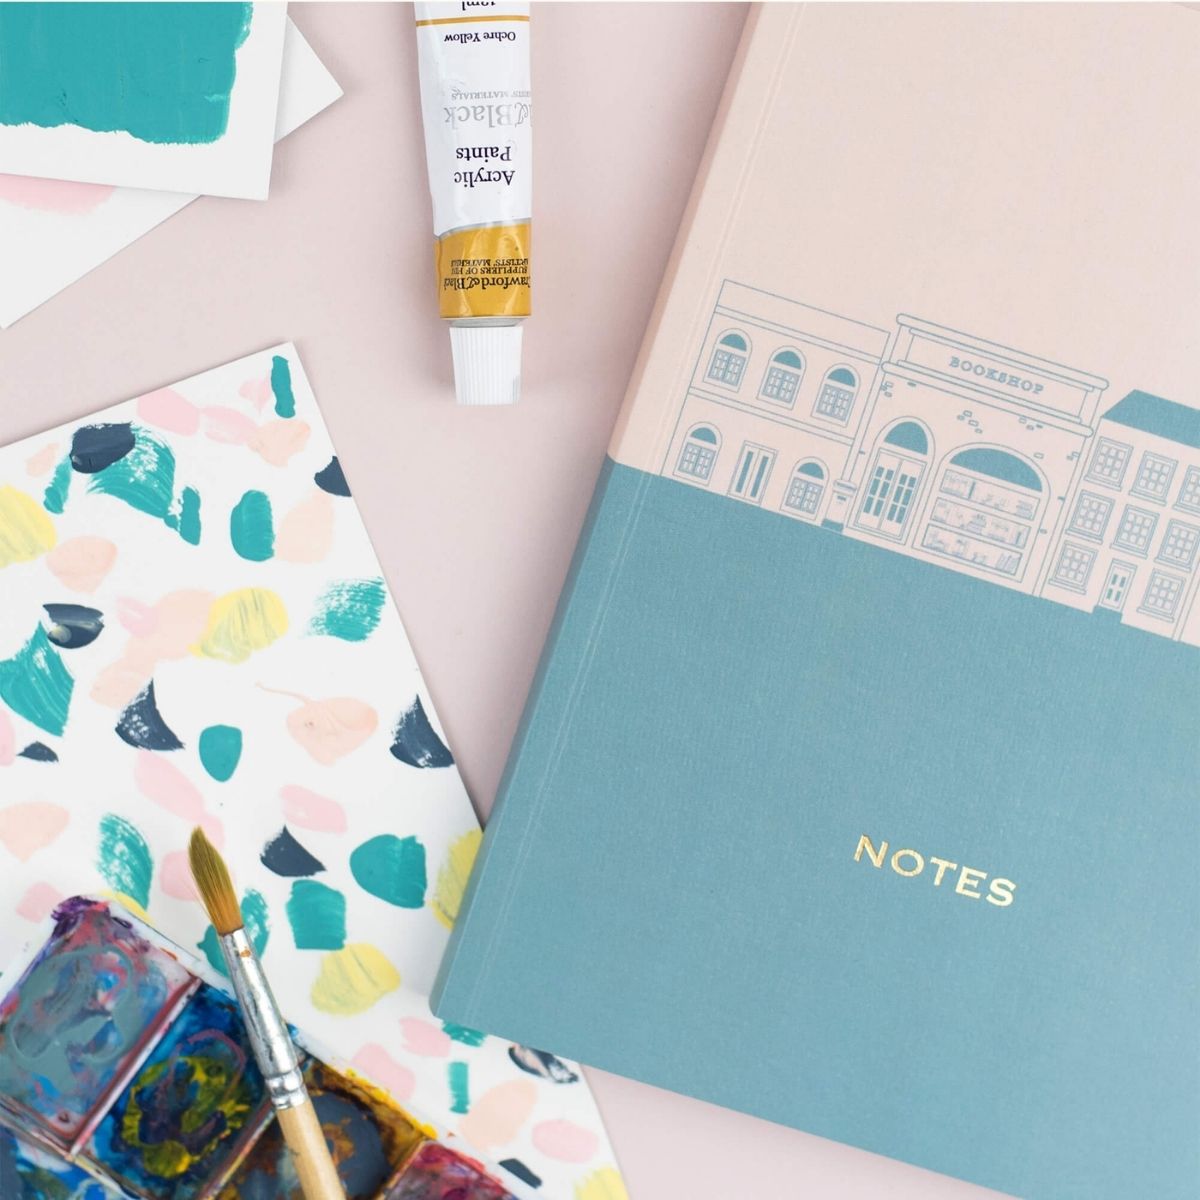 City Street Houses Notebook - The Design Palette